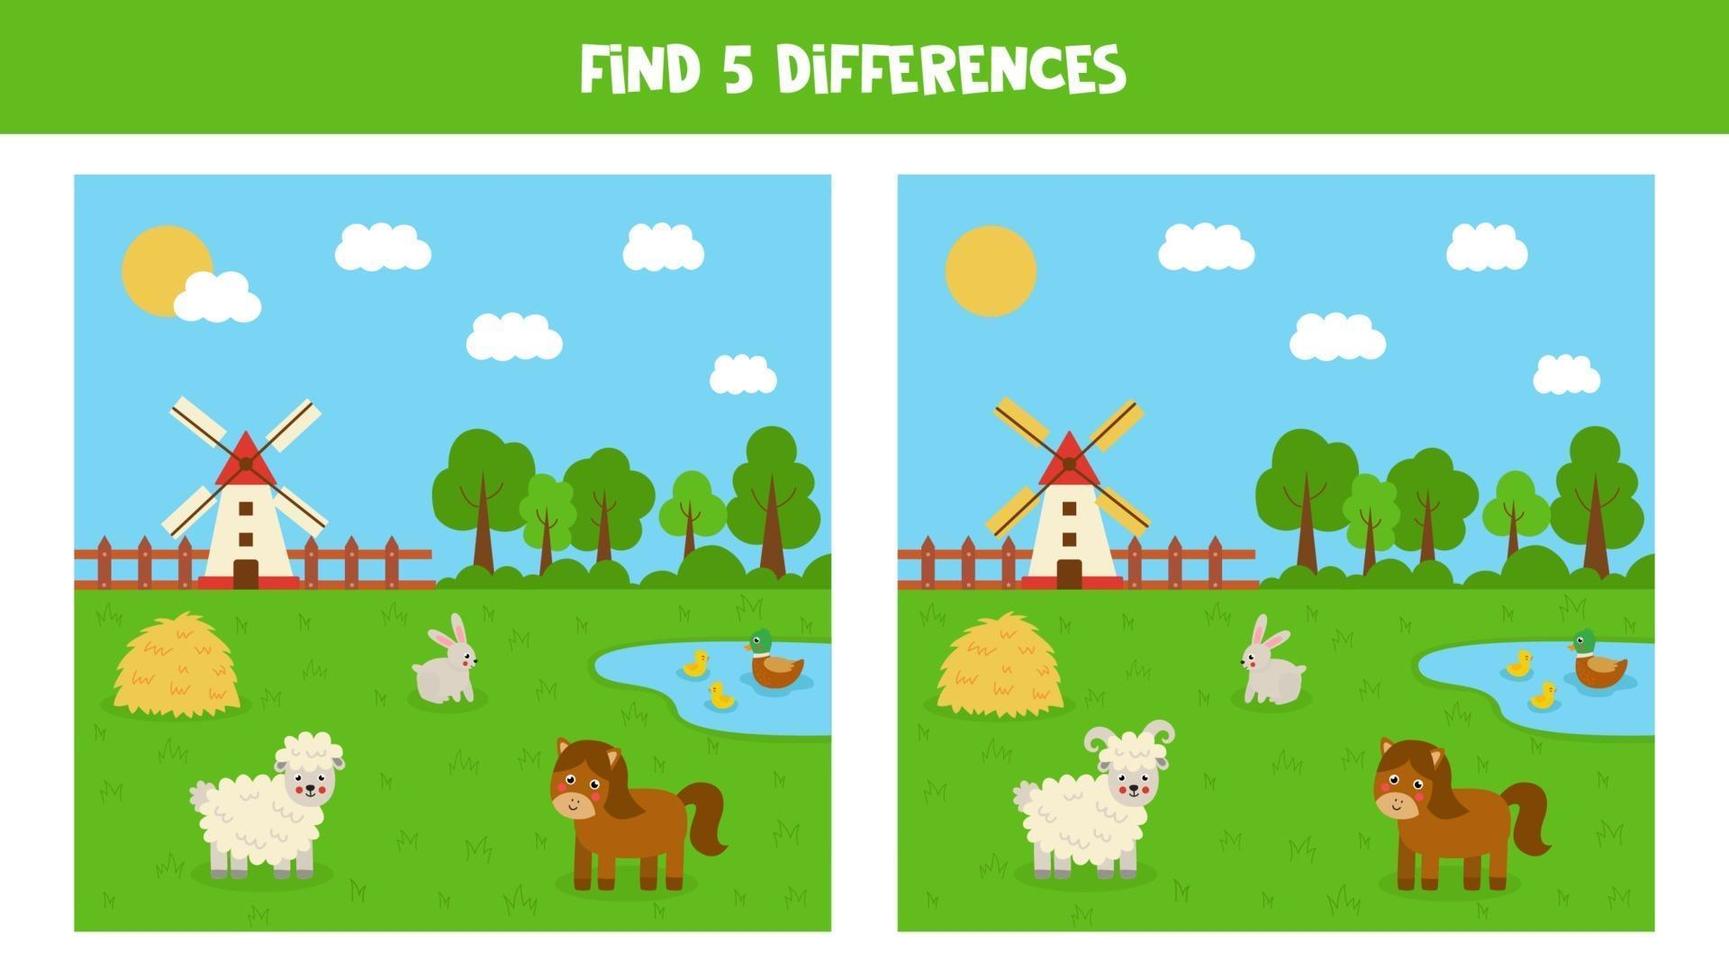 Find 5 differences between farm pictures. Game for kids. vector